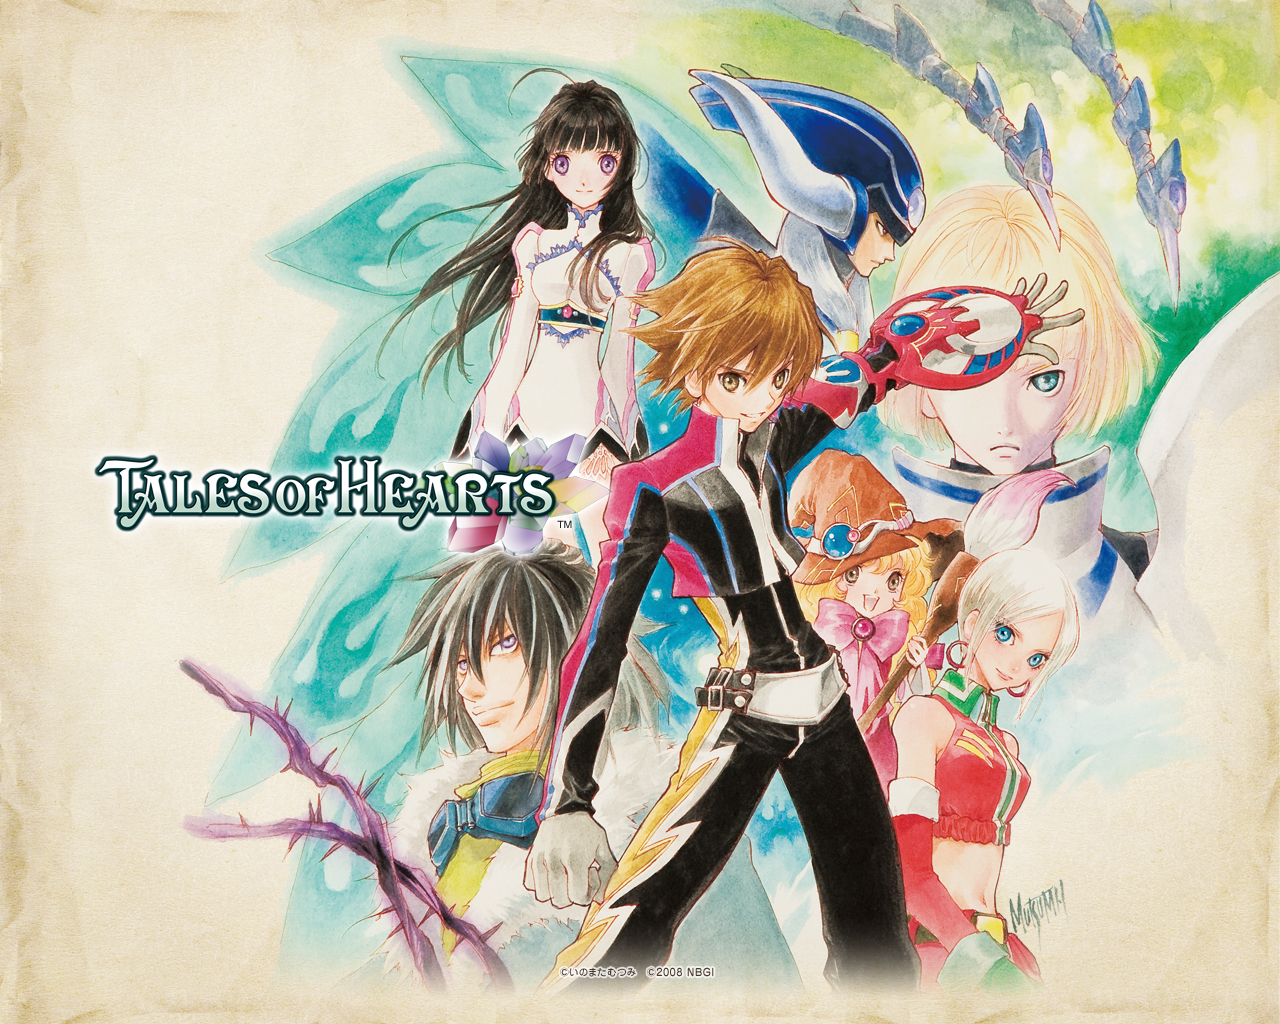 1280x1024
Tales of Hearts Group Wallpaper - 1280x1024

